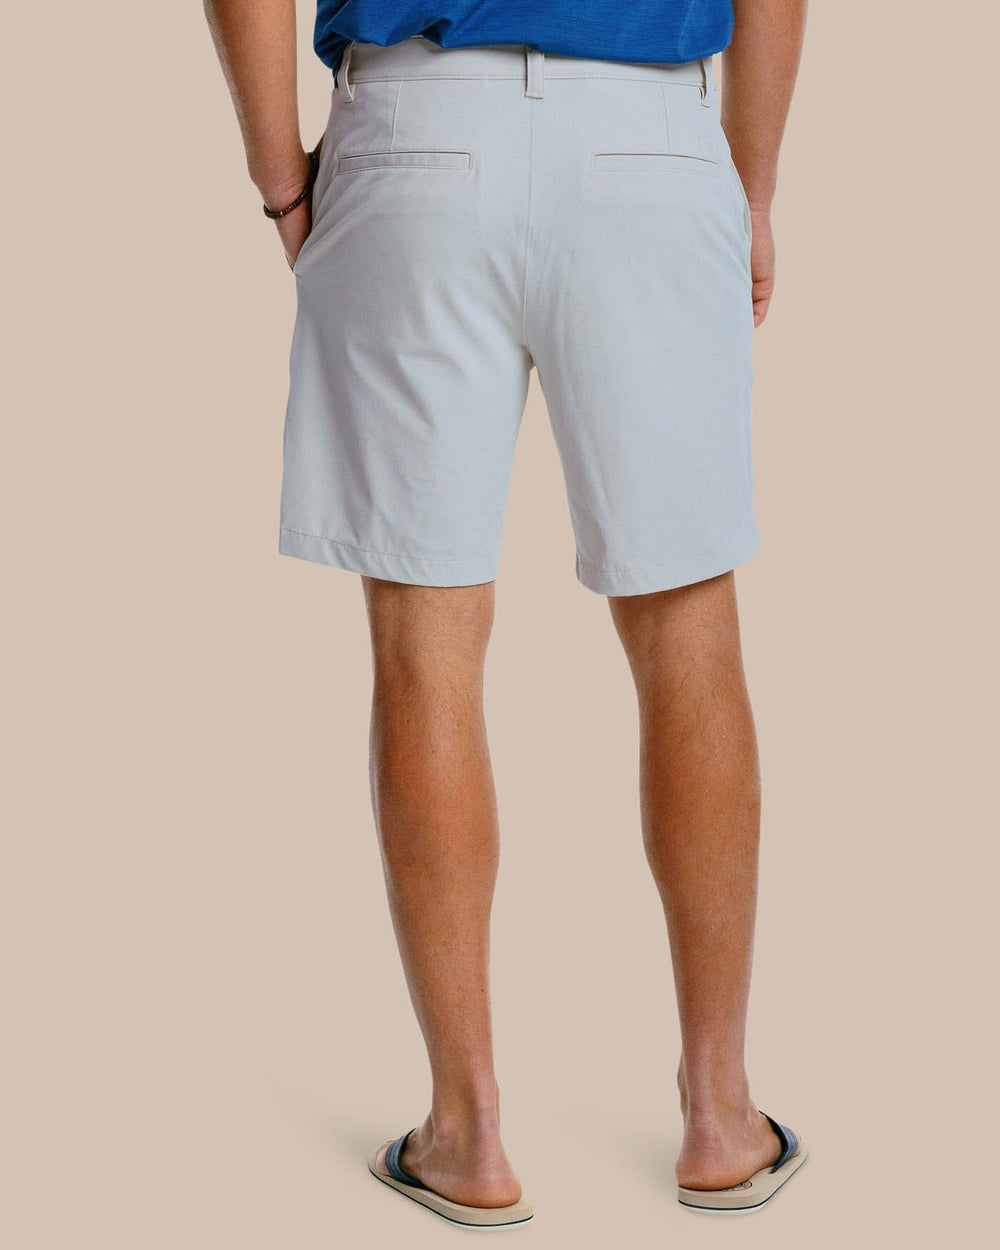 The back of the Men's Gulf 8 Inch Brrr Performance Short by Southern Tide - Seagull Grey